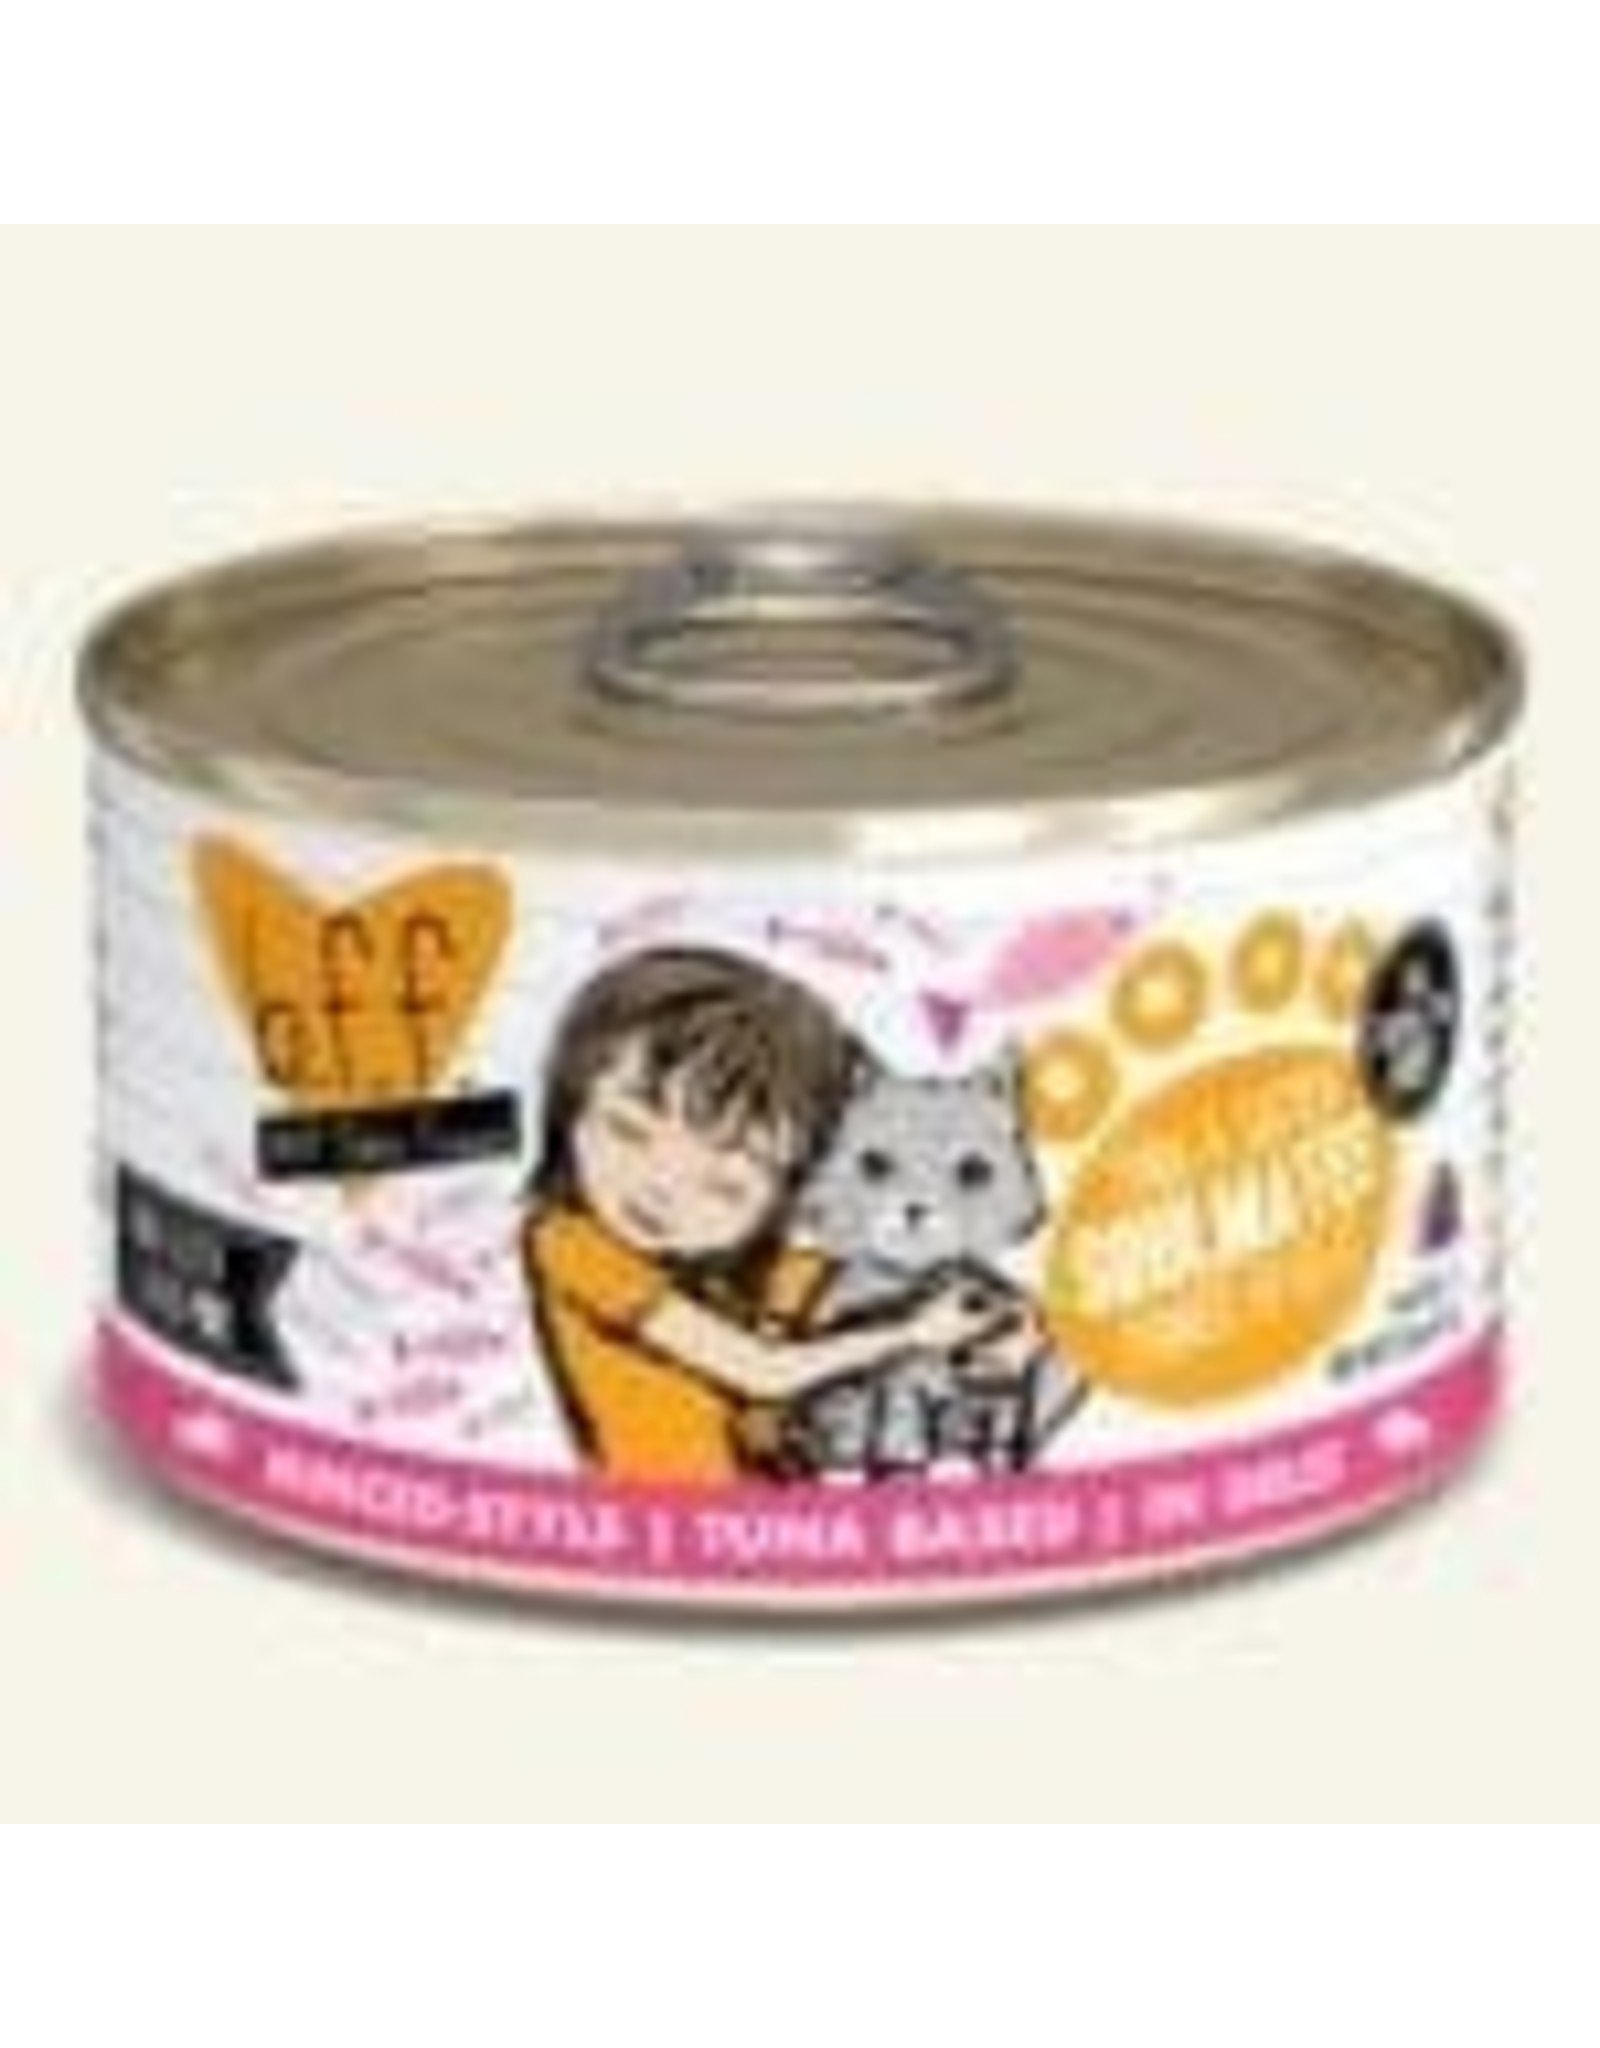 BFF BFF Can - Tuna & Salmon Soulmates for Cats 5.5oz